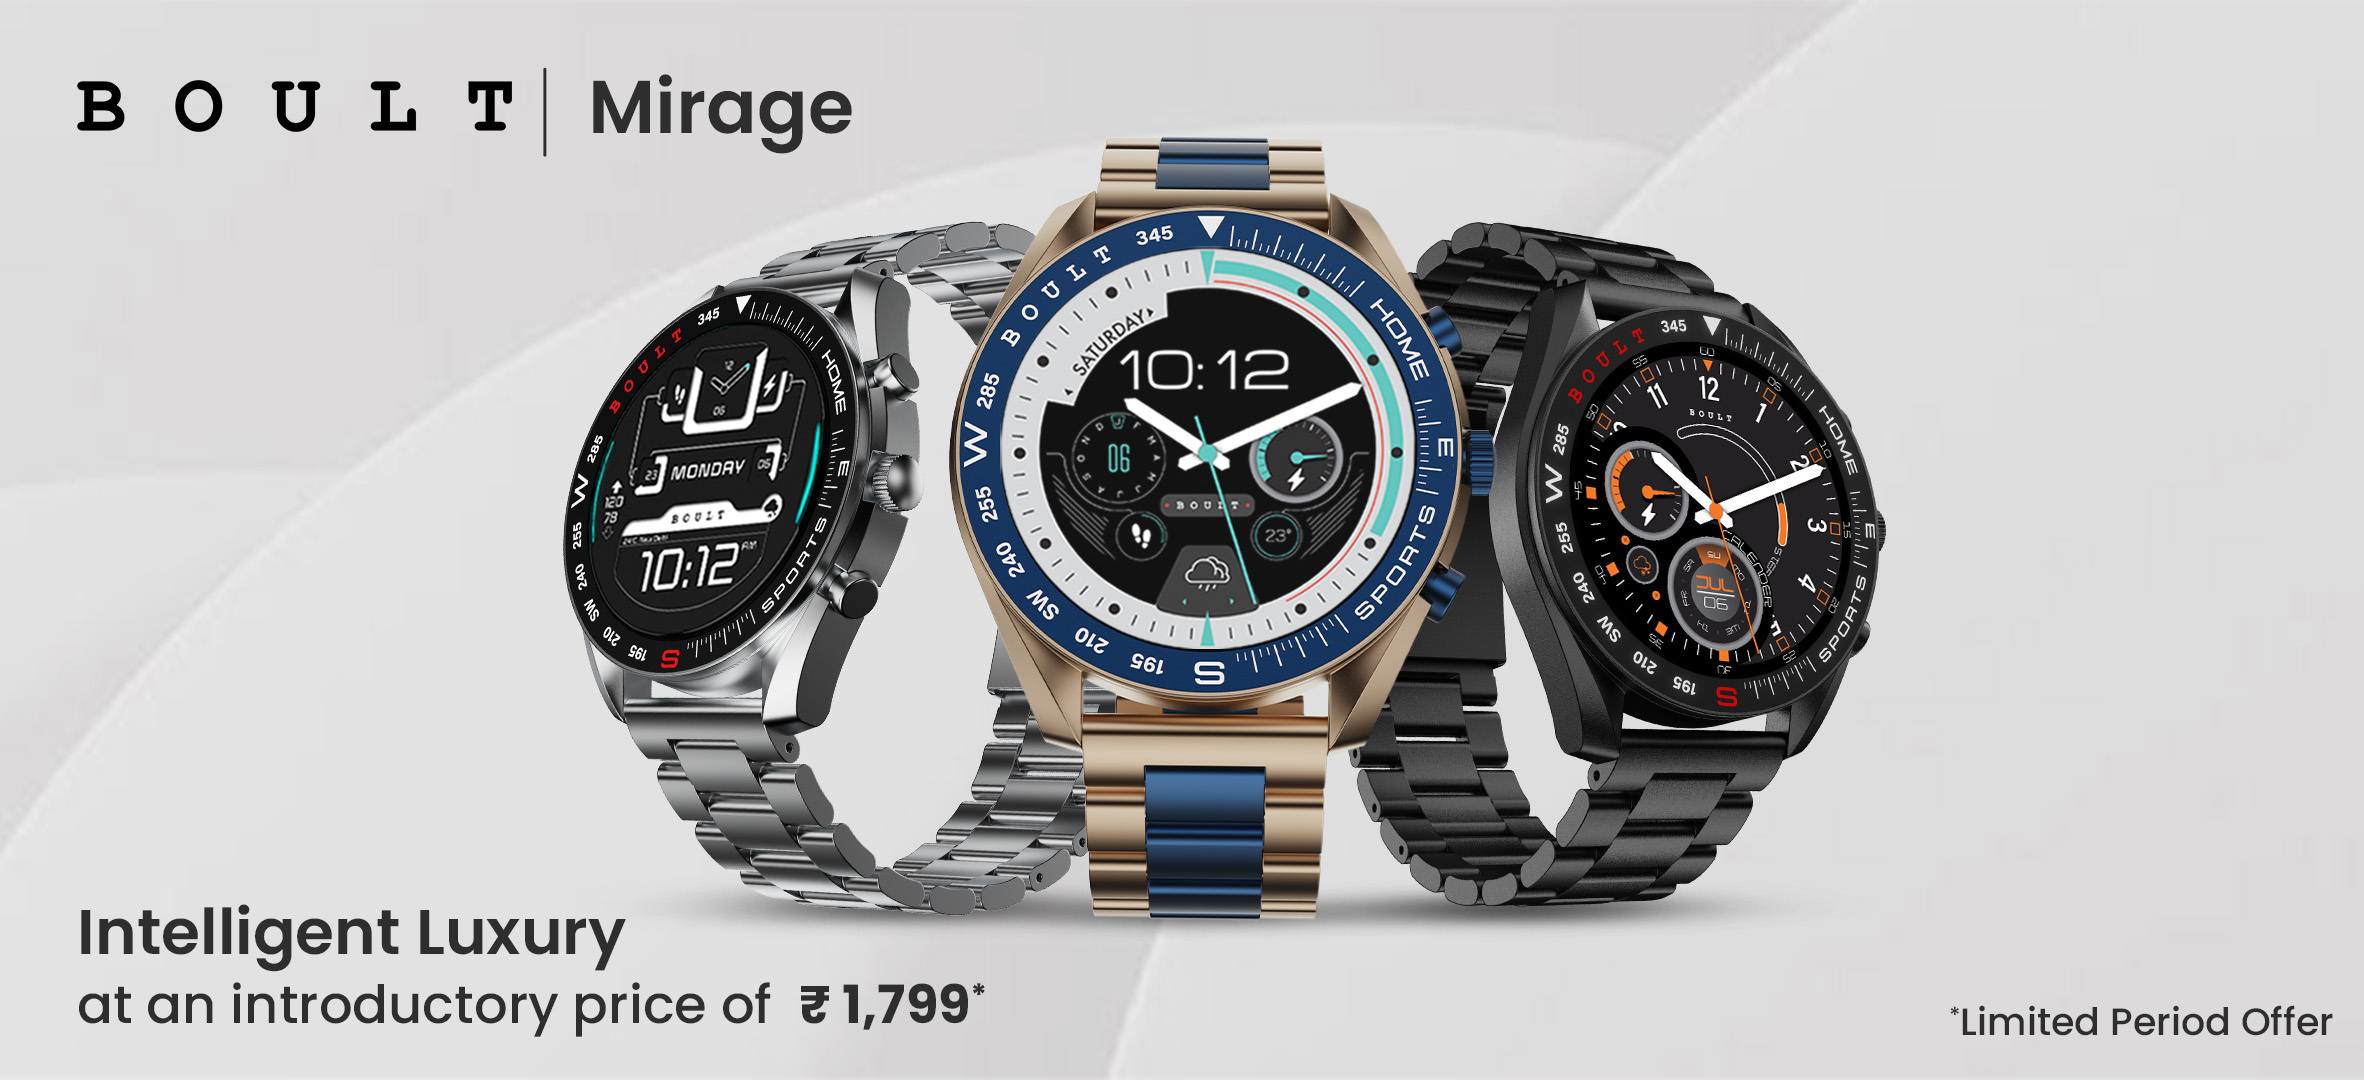 BOULT Launches New Mirage Smartwatch with Multiple Features